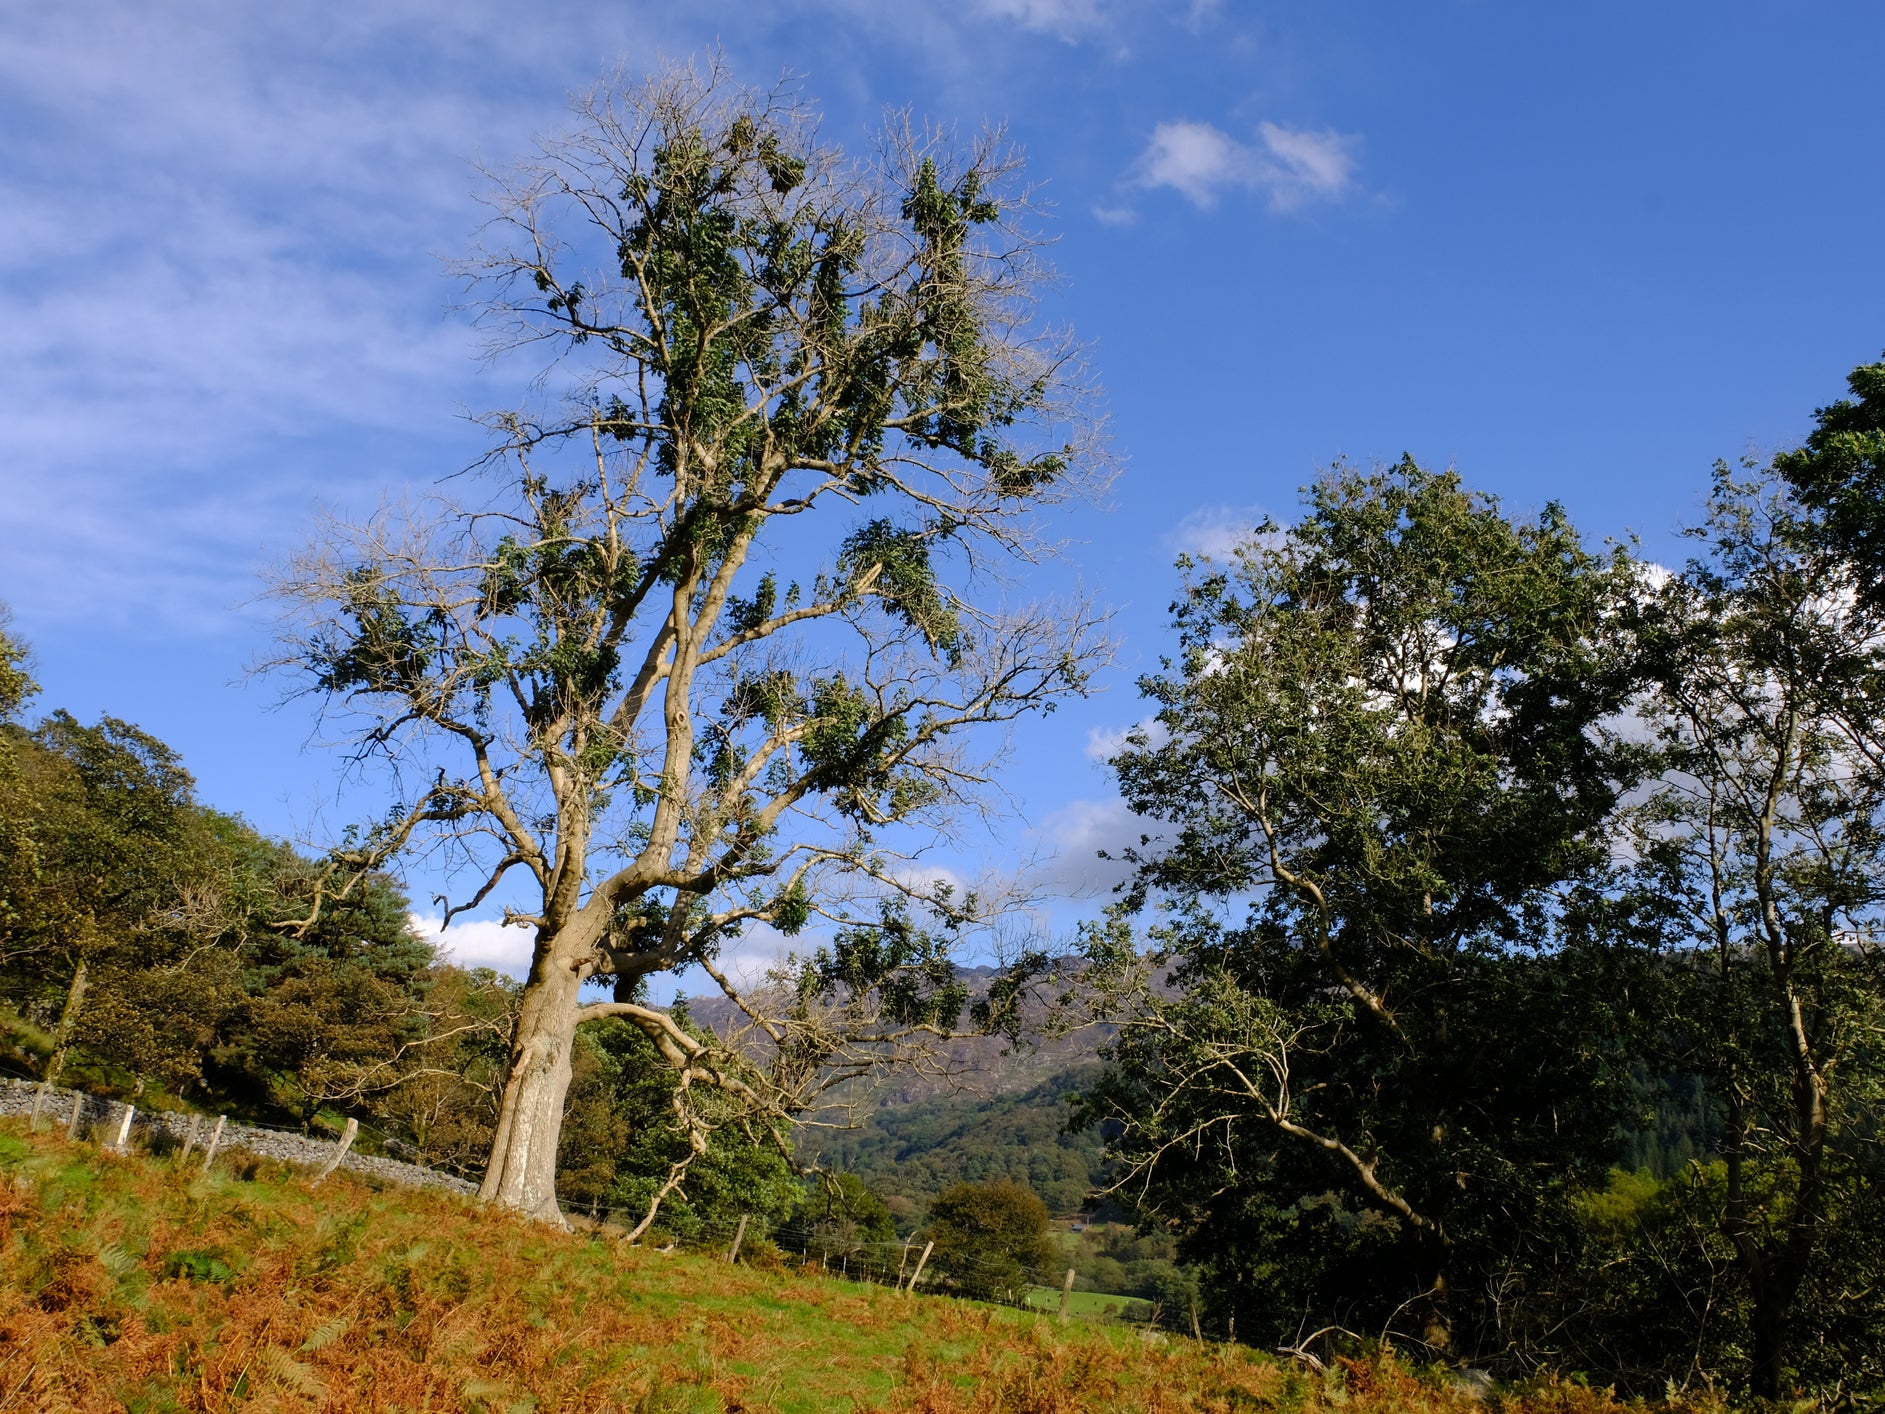 Ash dieback in a mature ash tree in Snowdonia, North Wales